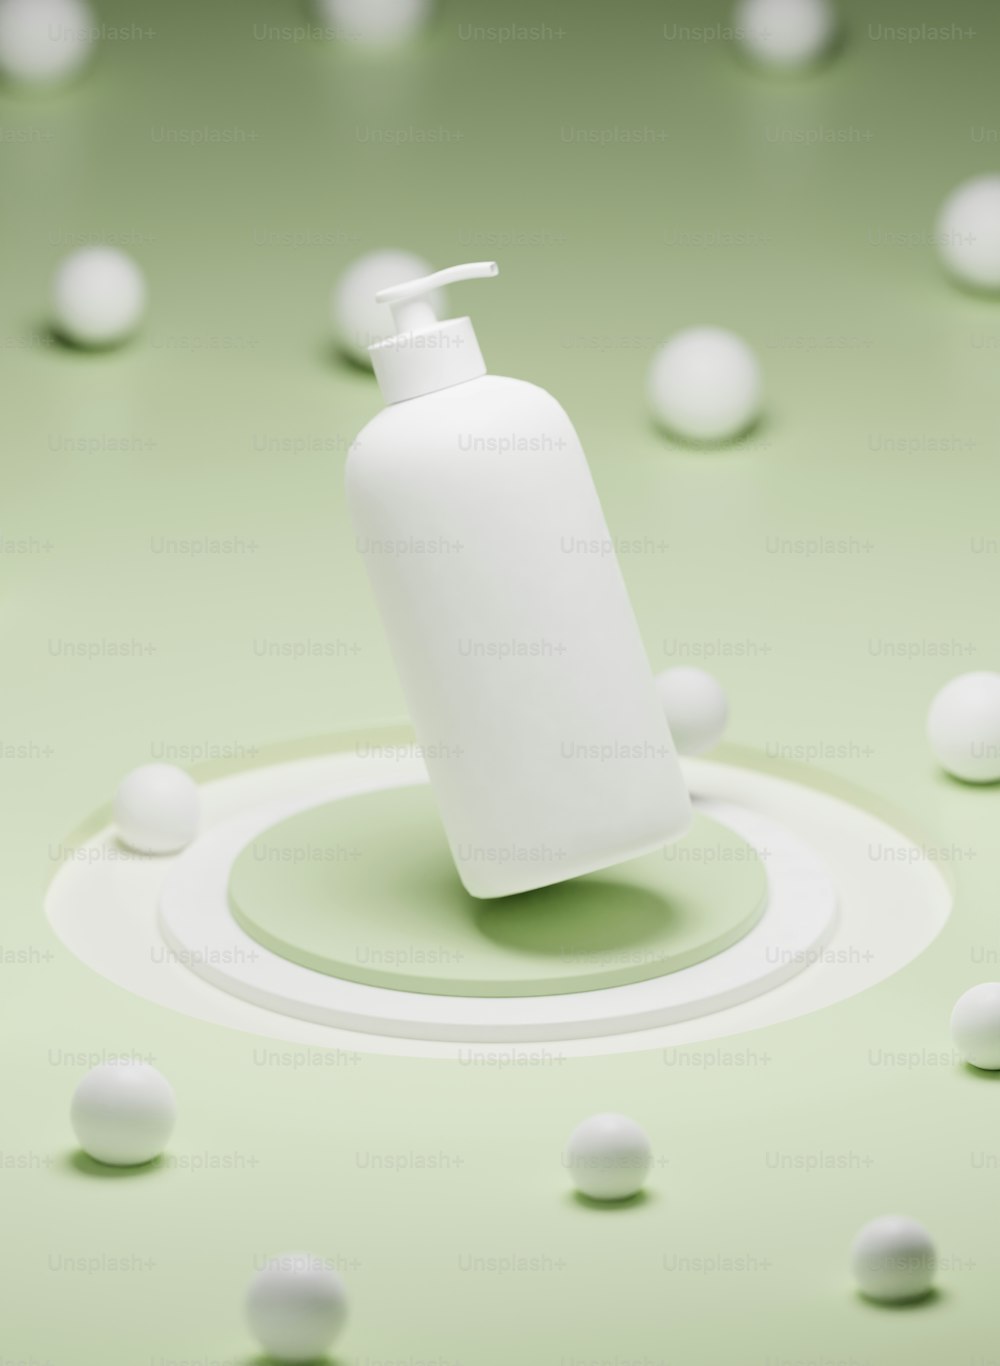 a bottle of lotion sitting on top of a green surface